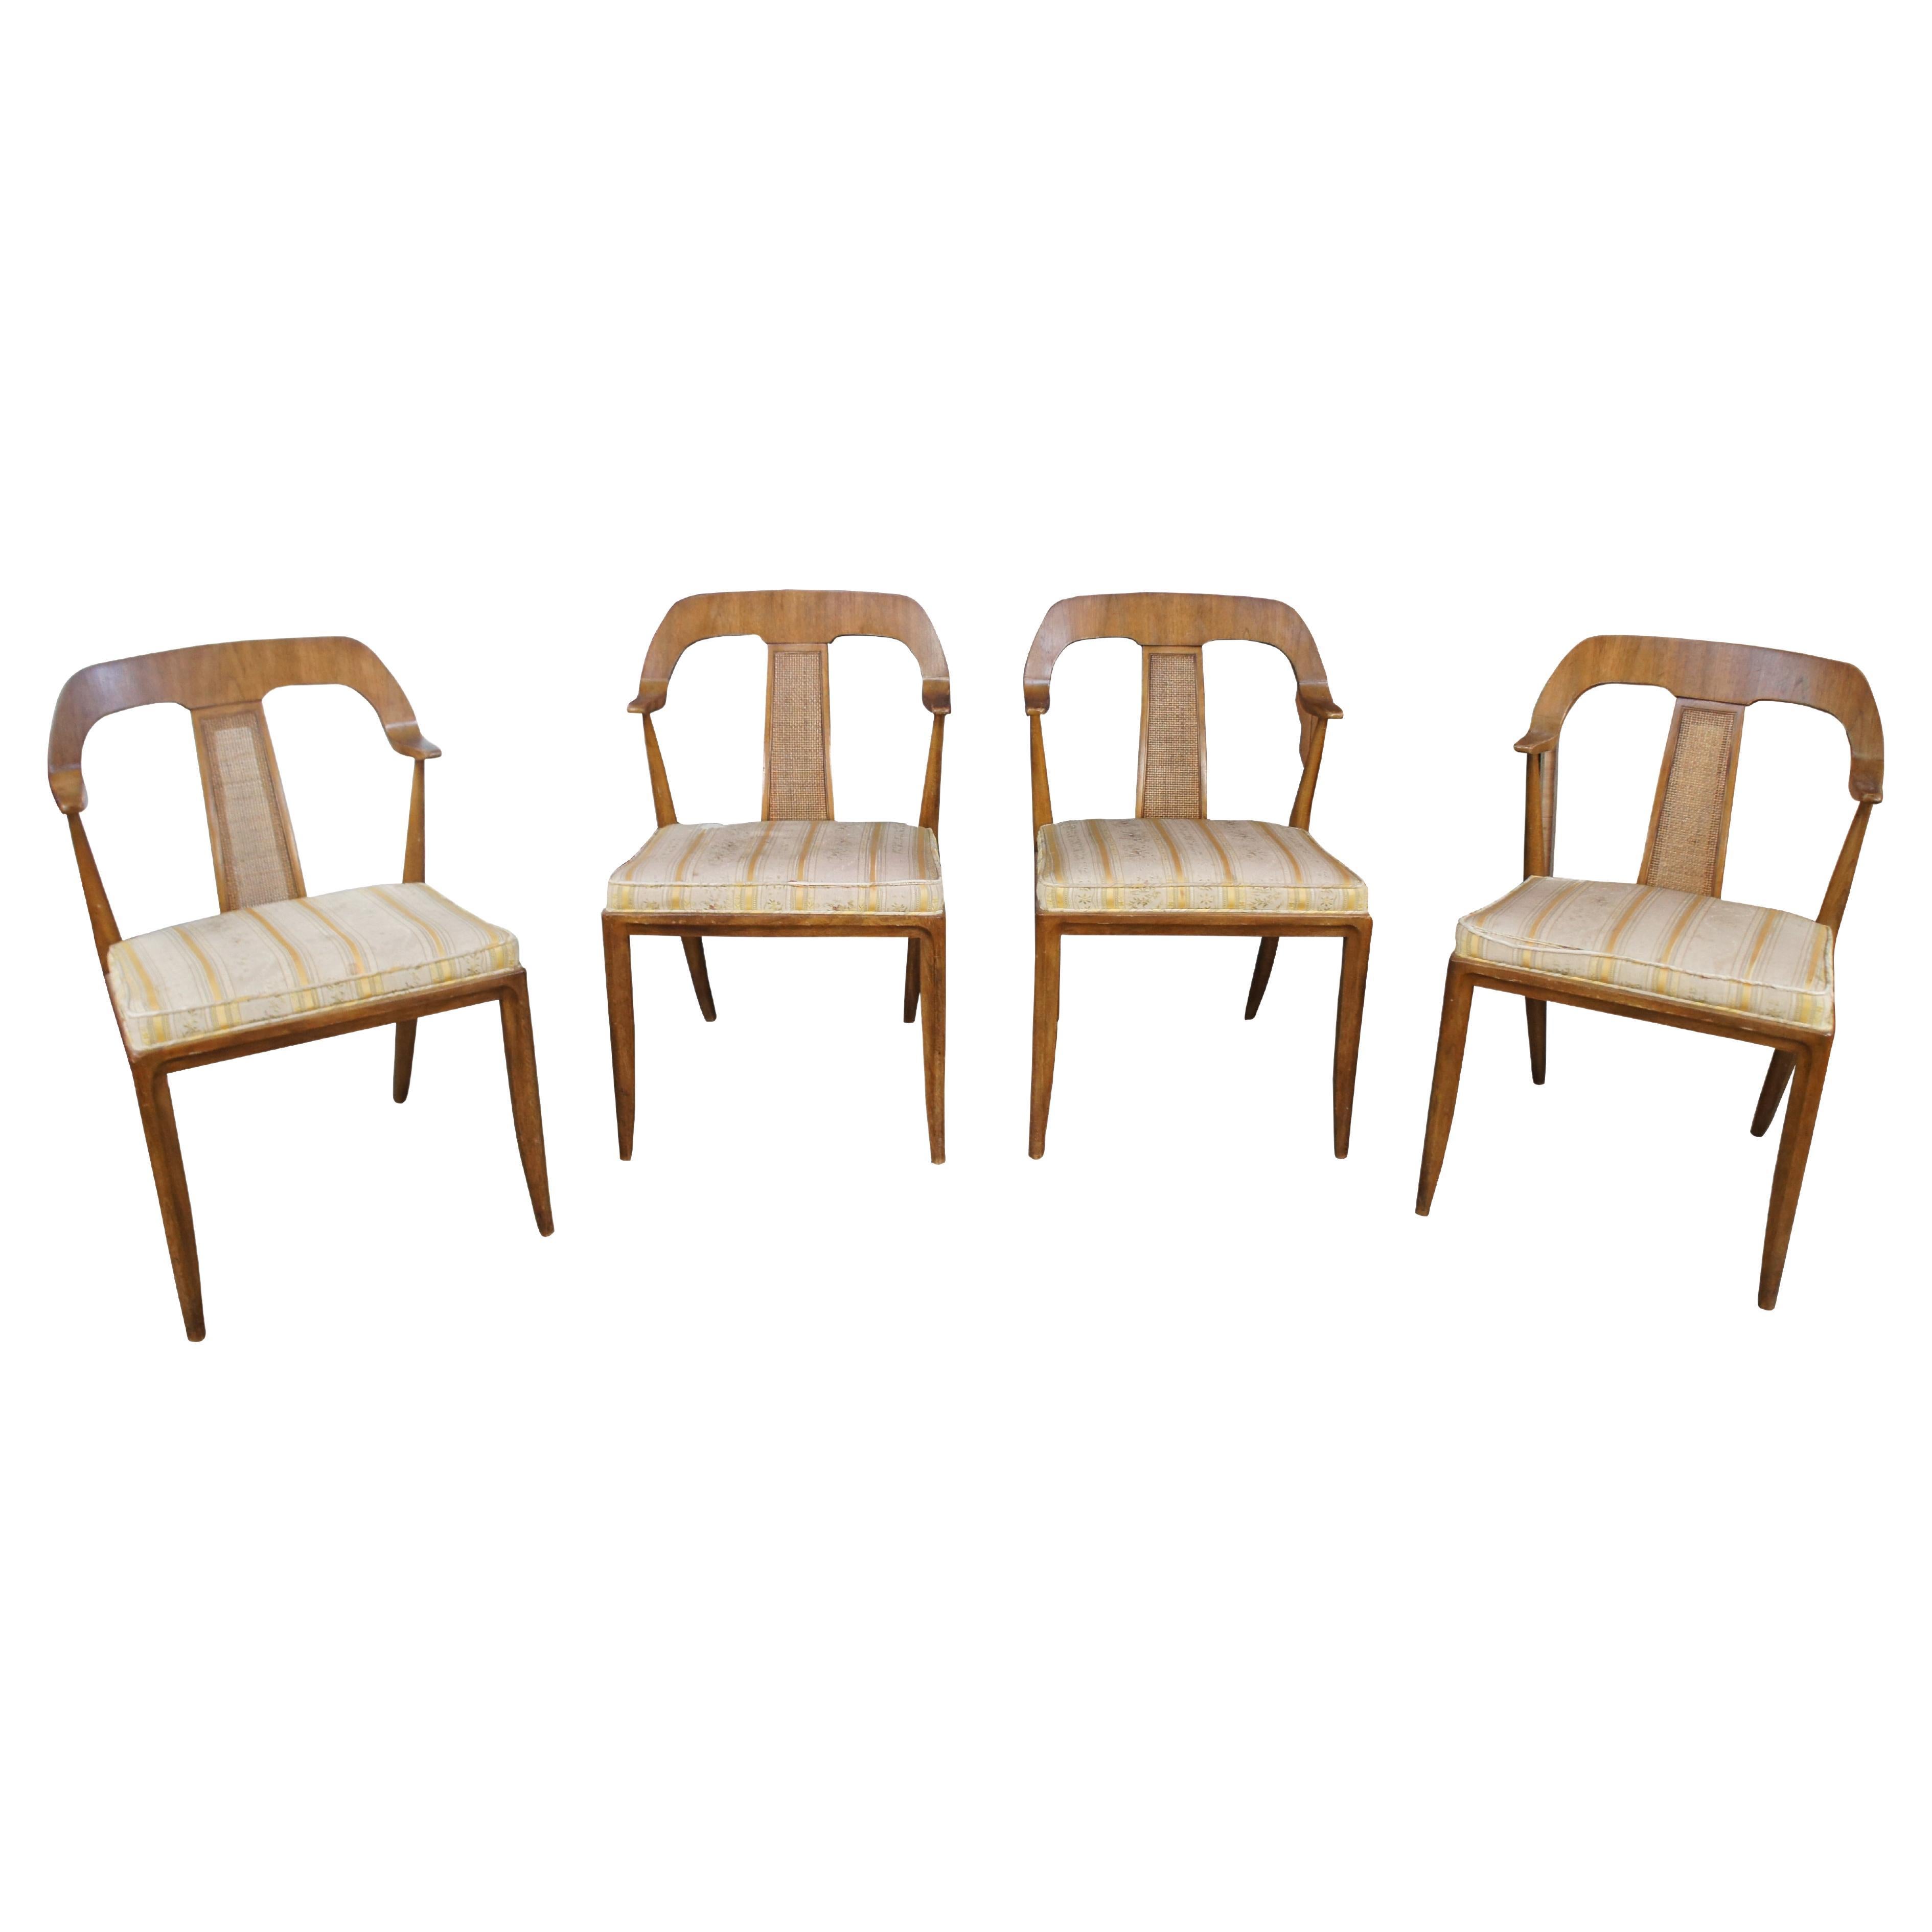 4 Michael Taylor Tomlinson Sophisticate Walnut Dining Chairs Mid Century Modern For Sale